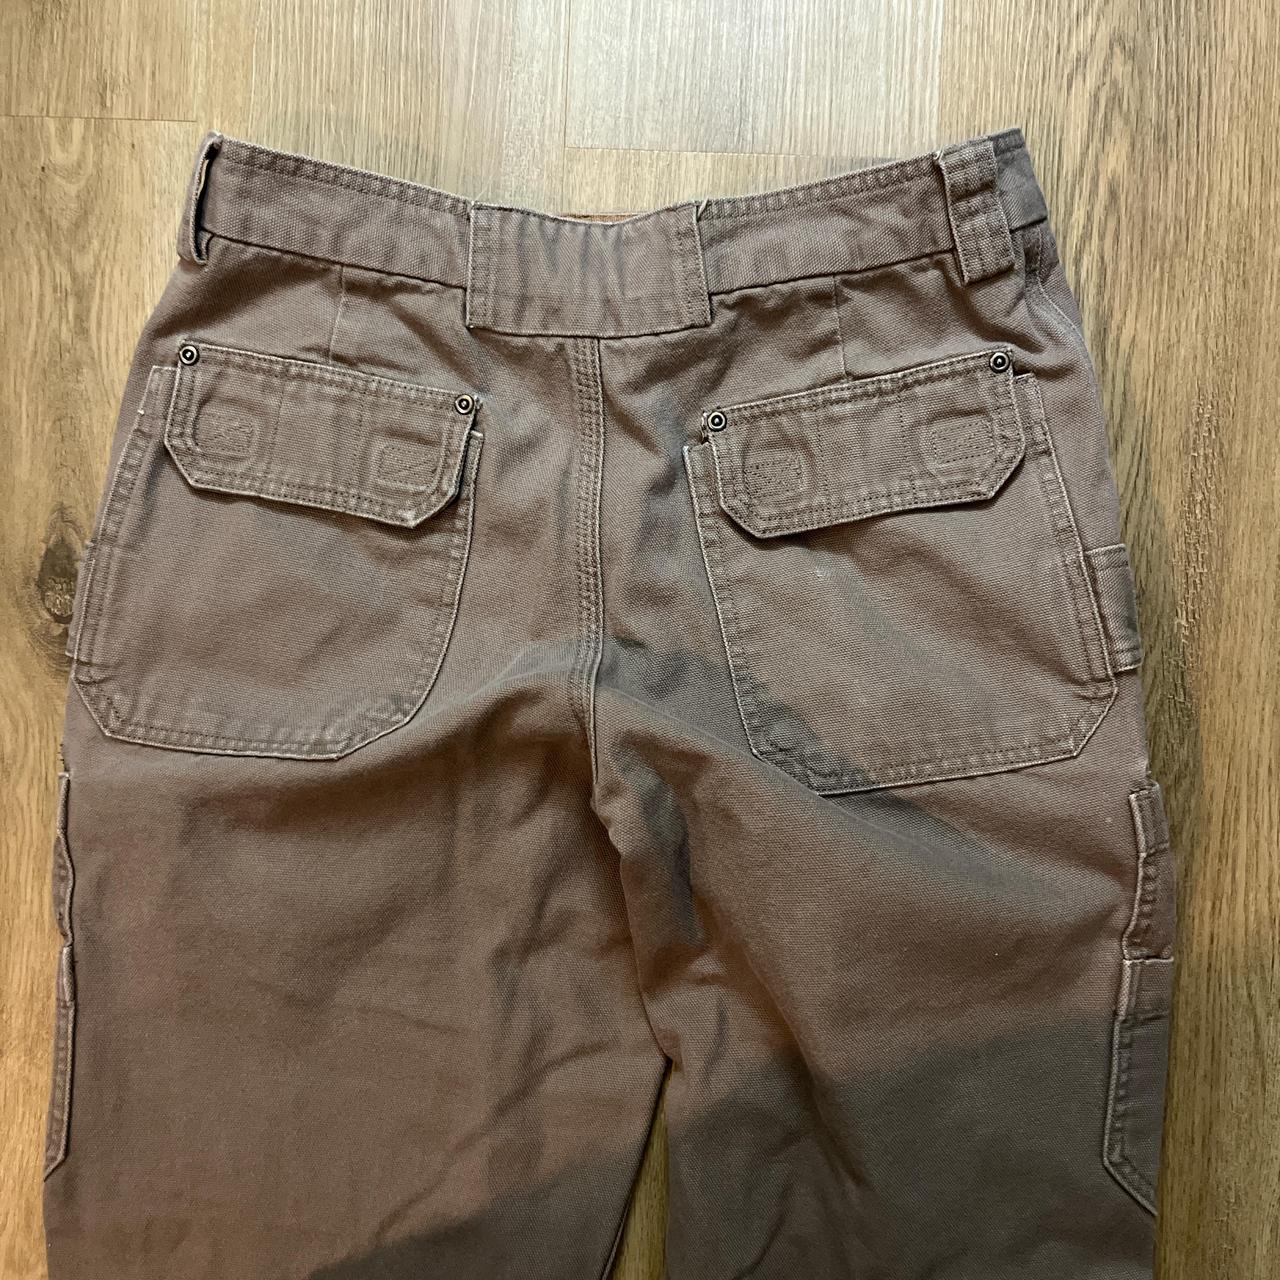 Deluth Trading Company work pants in an earthy grey - Depop